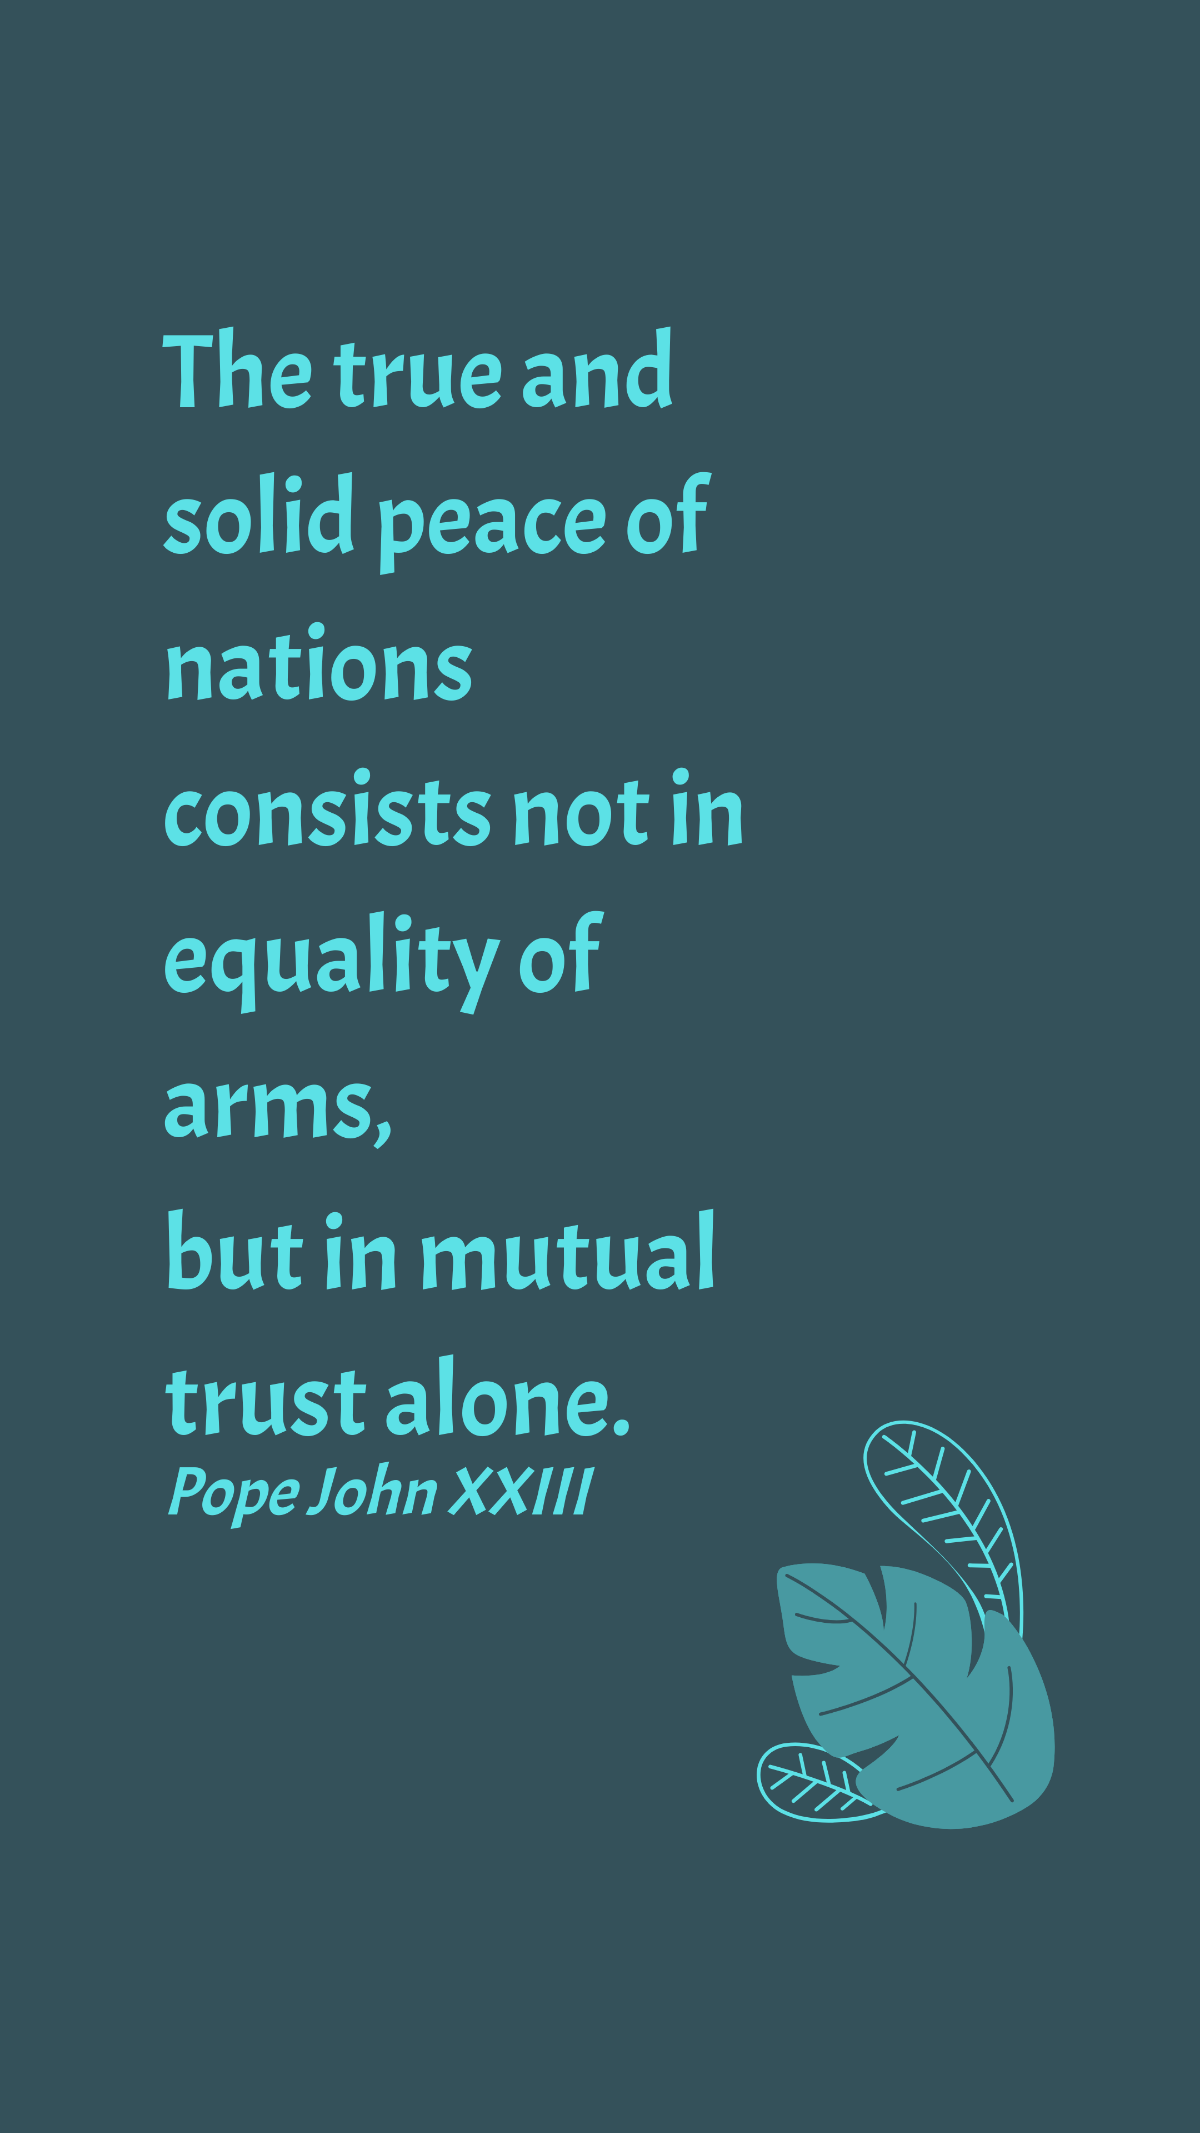 Pope John XXIII - The true and solid peace of nations consists not in equality of arms, but in mutual trust alone.